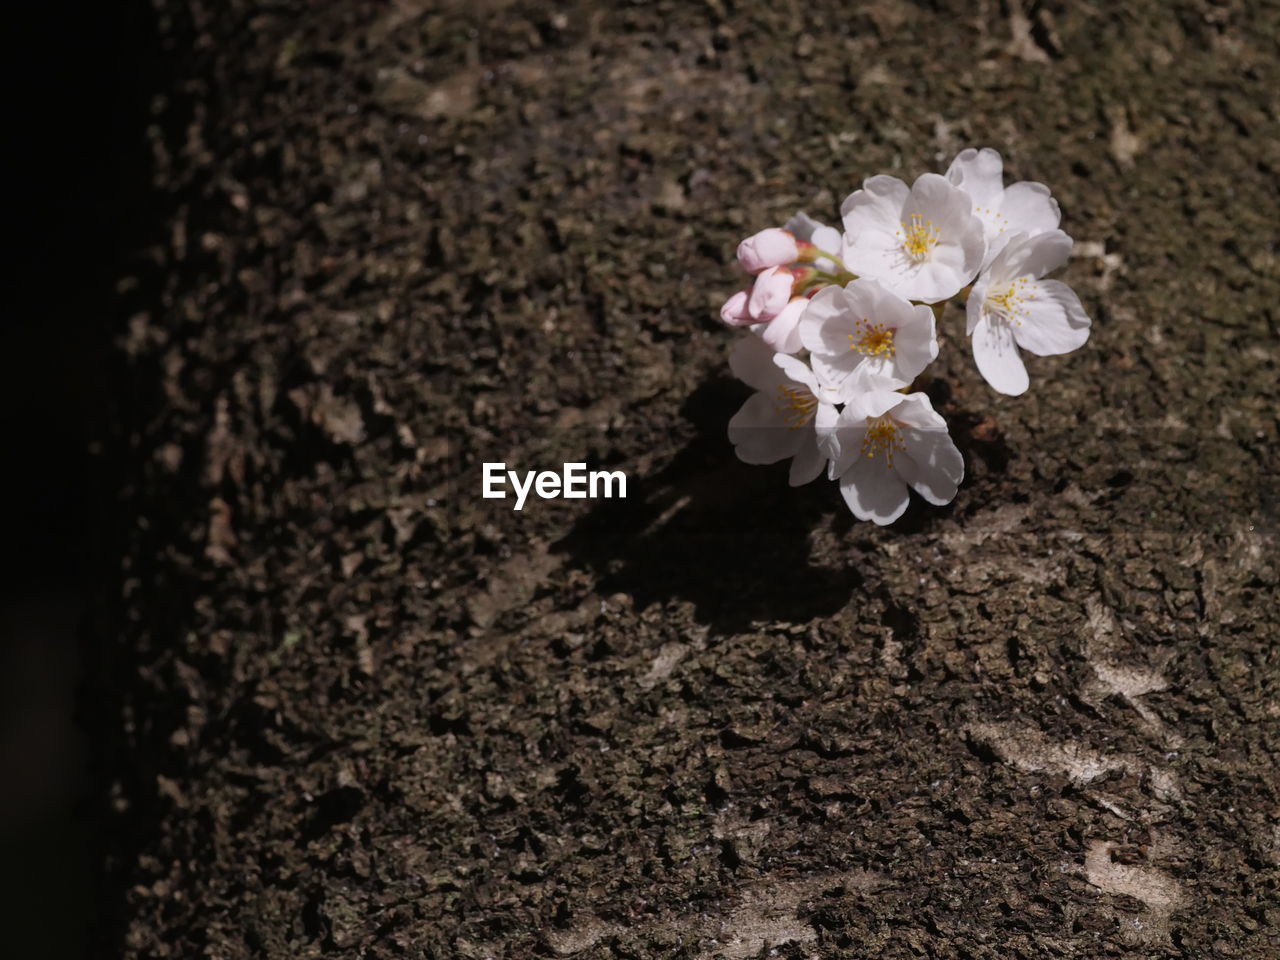 CLOSE-UP OF FRESH WHITE FLOWERS BLOOMING IN TREE